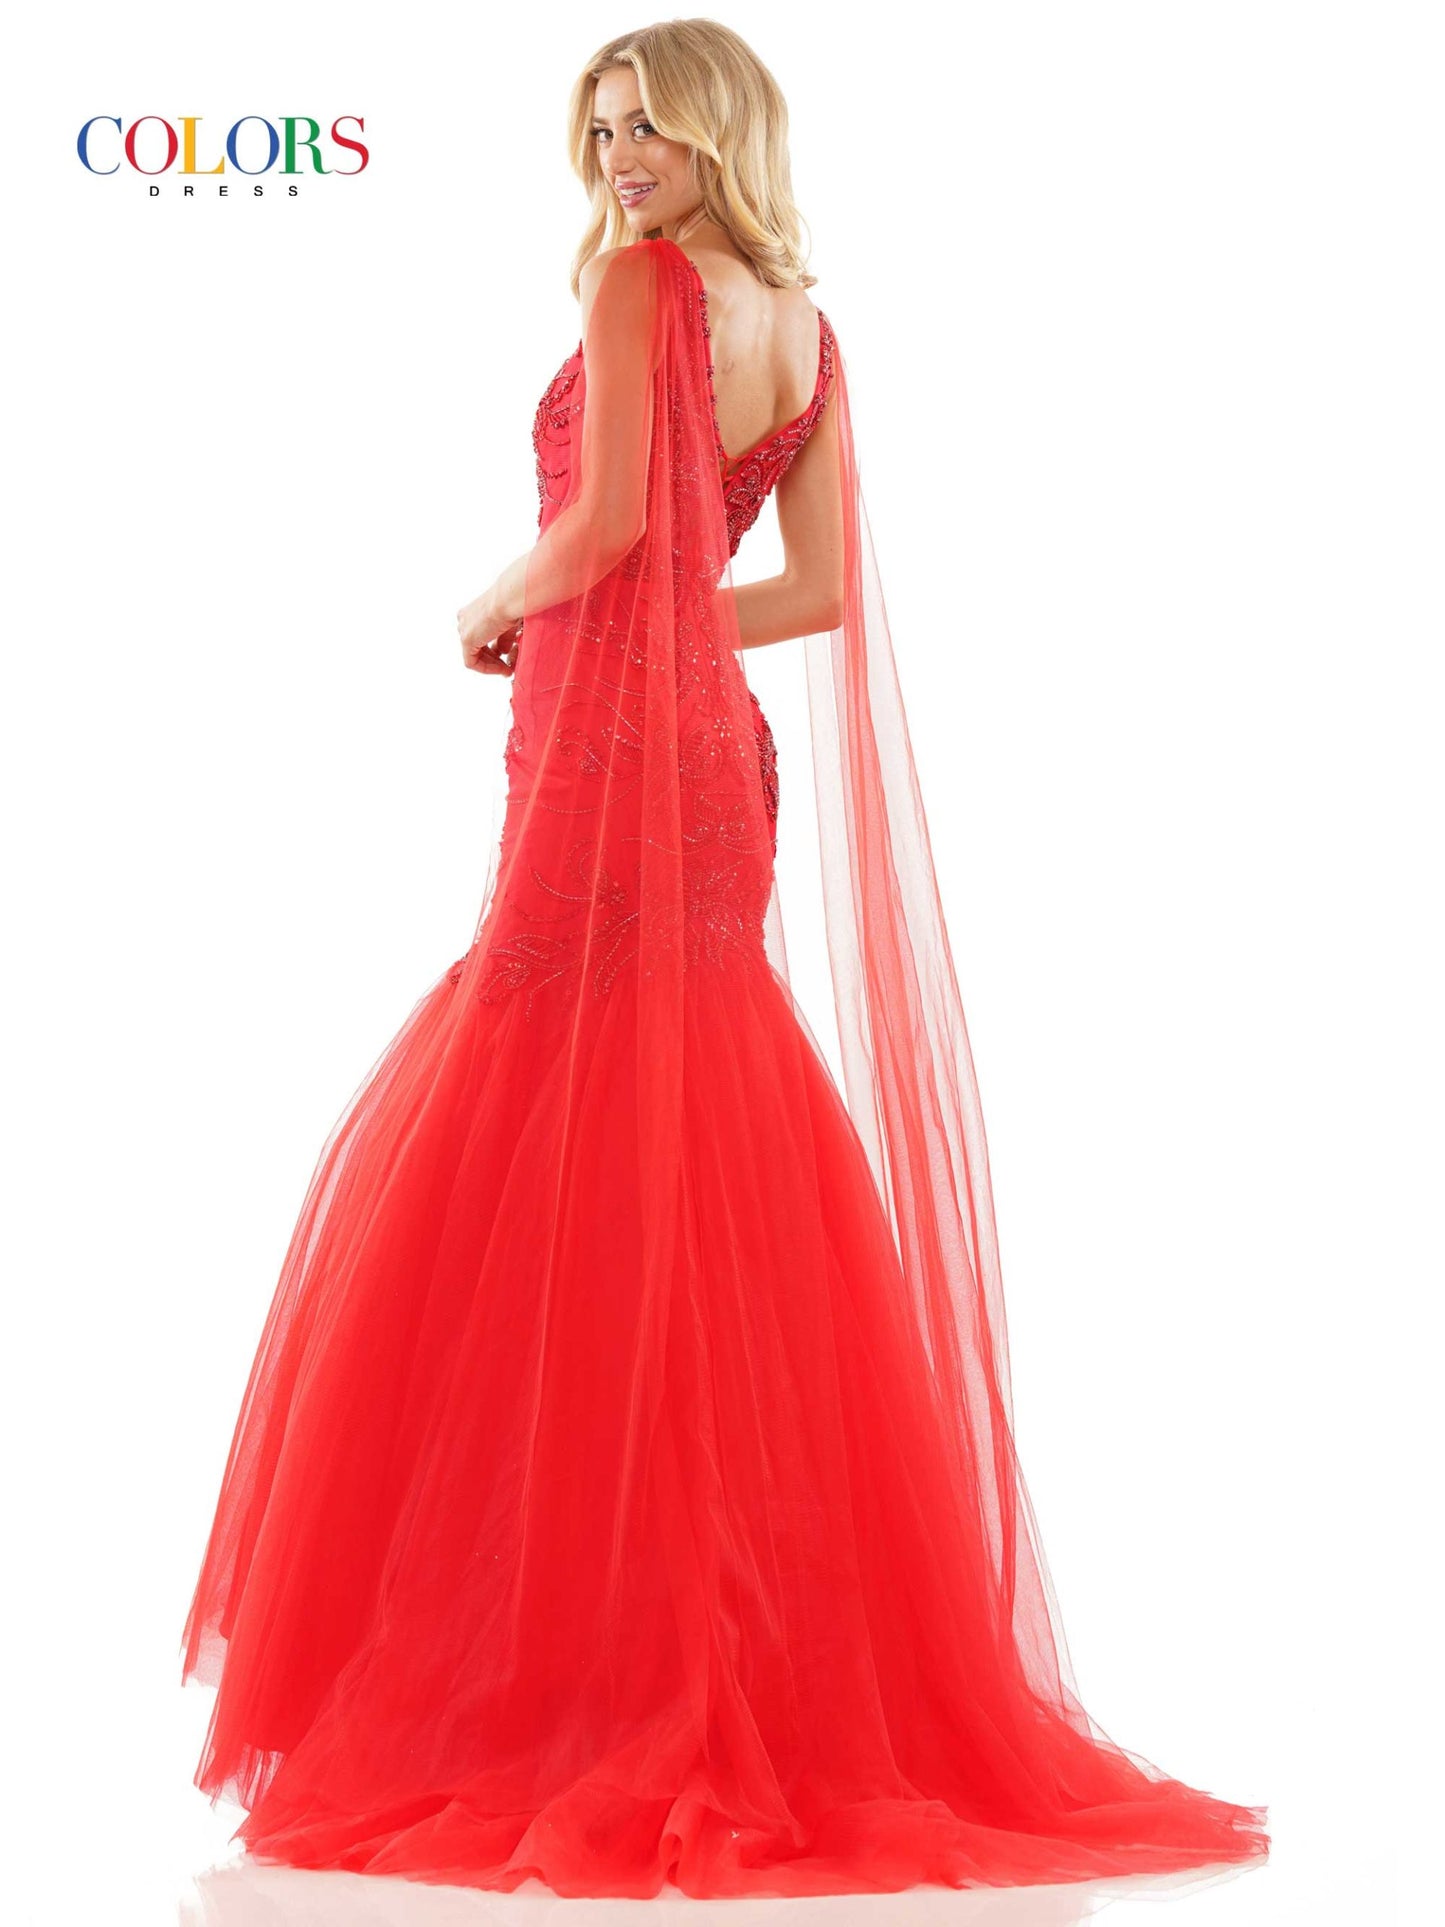 Colors Dress 2993 Mermaid Prom Dress with Capes 47"beaded mesh mermaid dress with V-neck, lace-up on back,  red